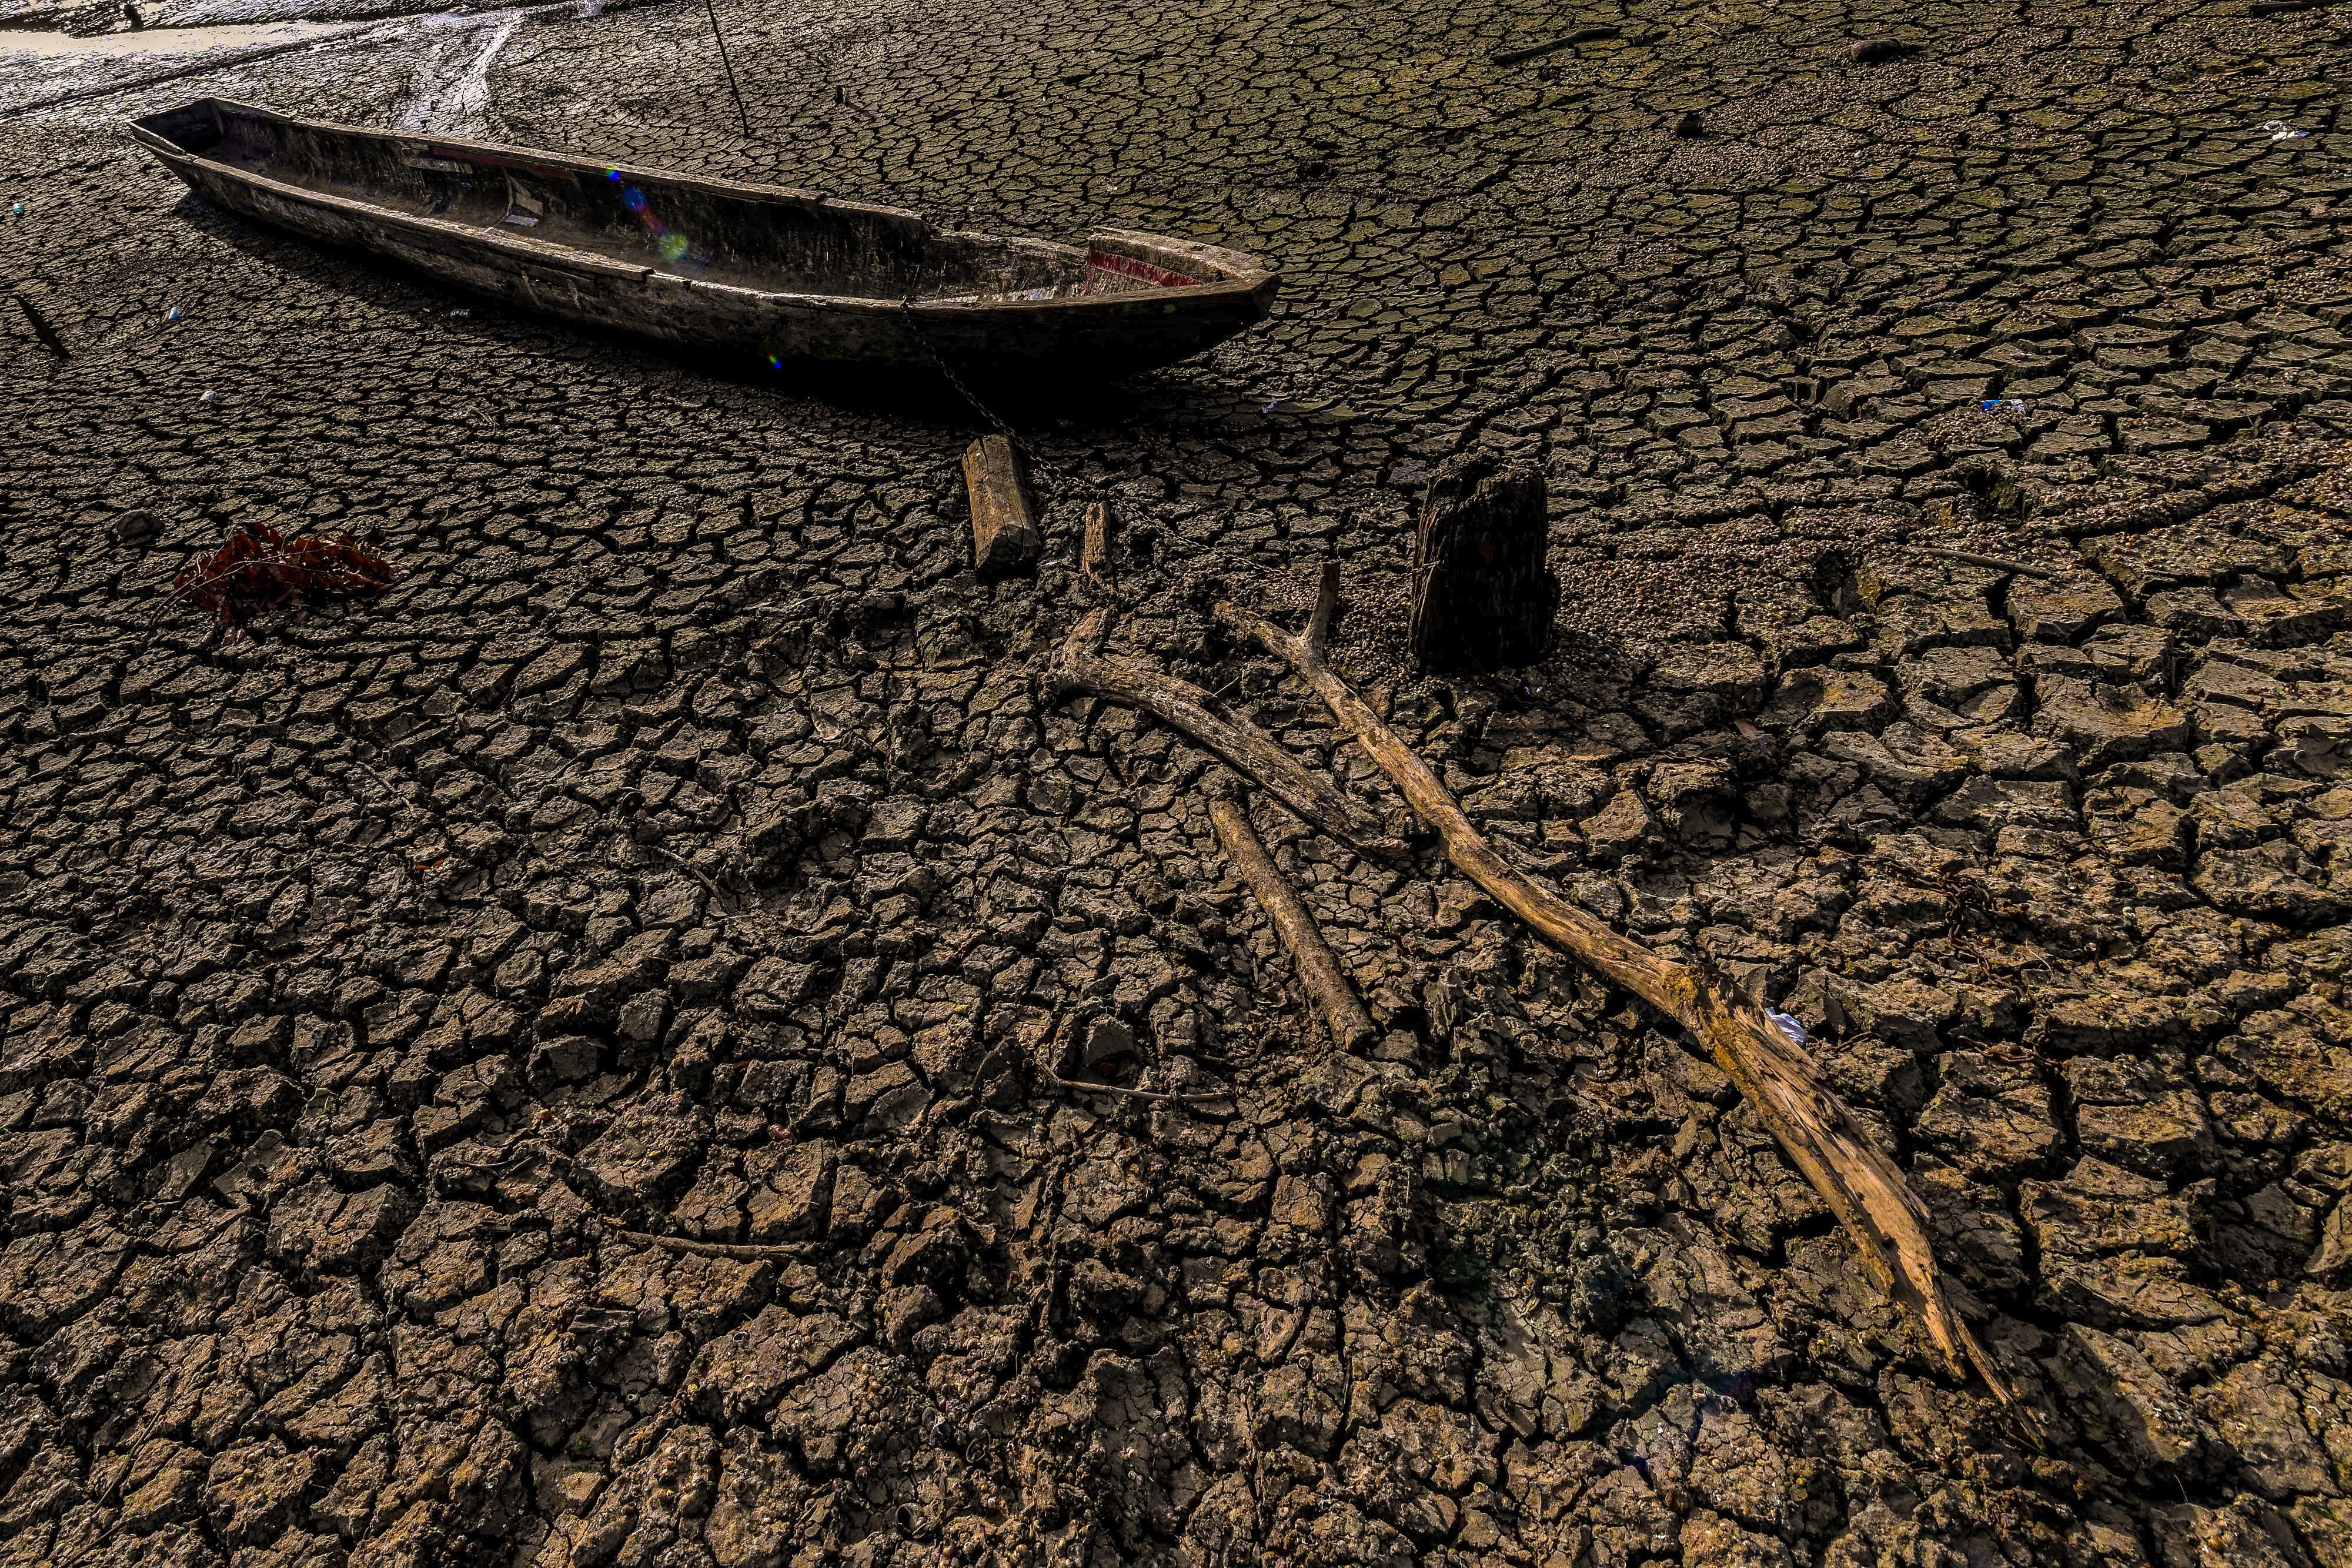 A boat sits stranded on the dried-up Alhajuela Lake in Colon province, 50km north of Panama City, on April 21. The scarcity of rainfall due to global warming has forced the Panama Canal to reduce the number of ships passing through the interoceanic waterway, in the midst of a water supply crisis that threatens the future of this maritime route. Photo: AFP